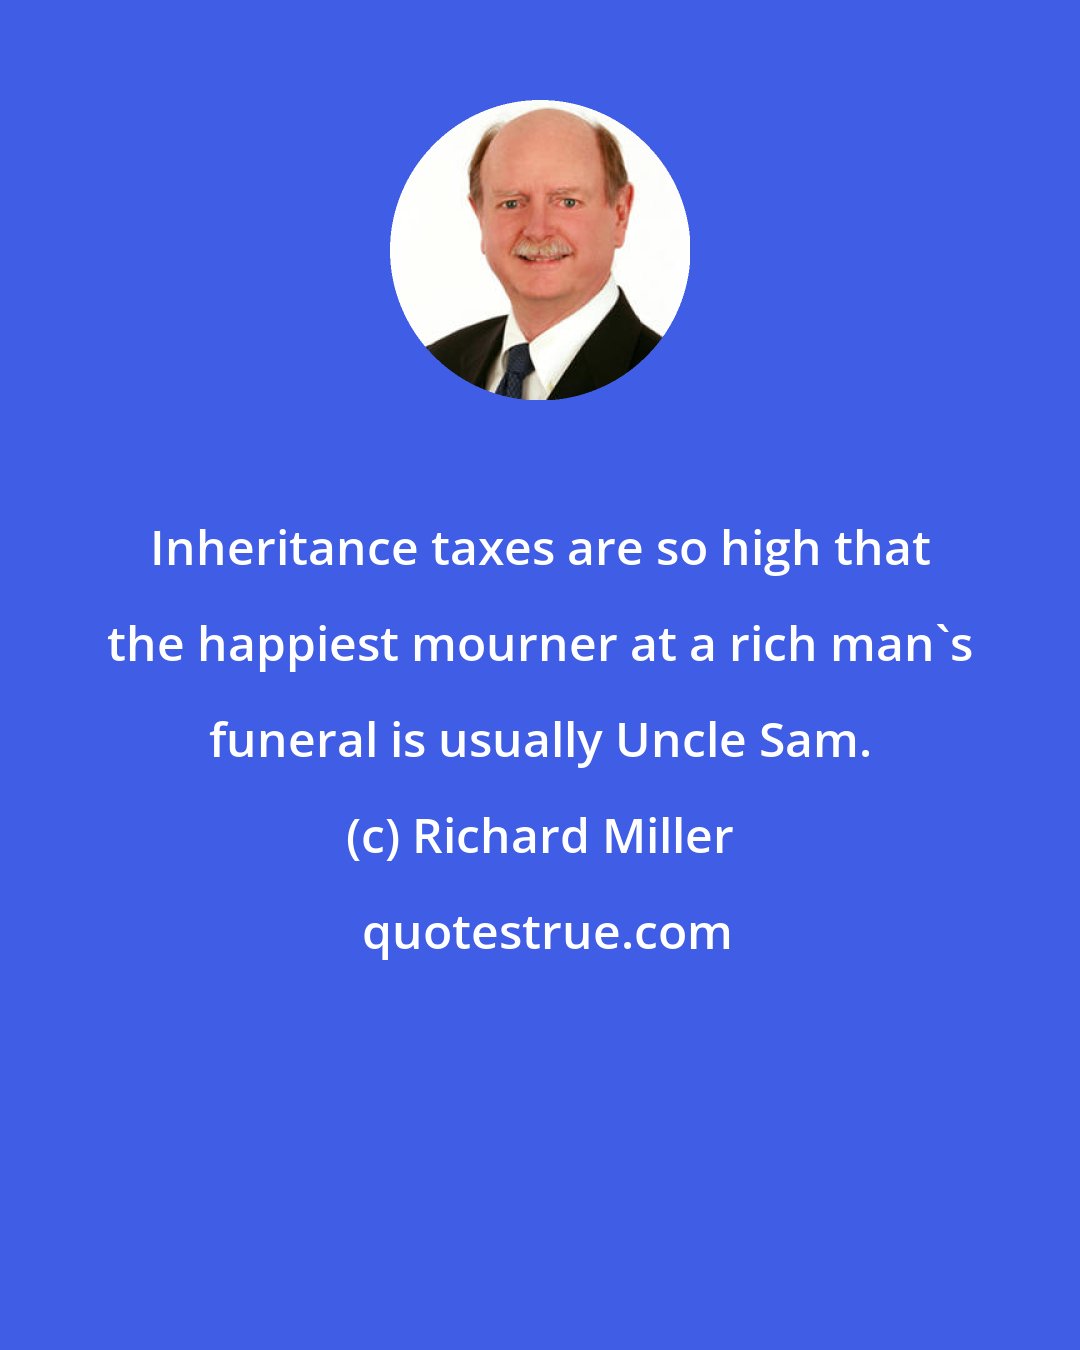 Richard Miller: Inheritance taxes are so high that the happiest mourner at a rich man's funeral is usually Uncle Sam.